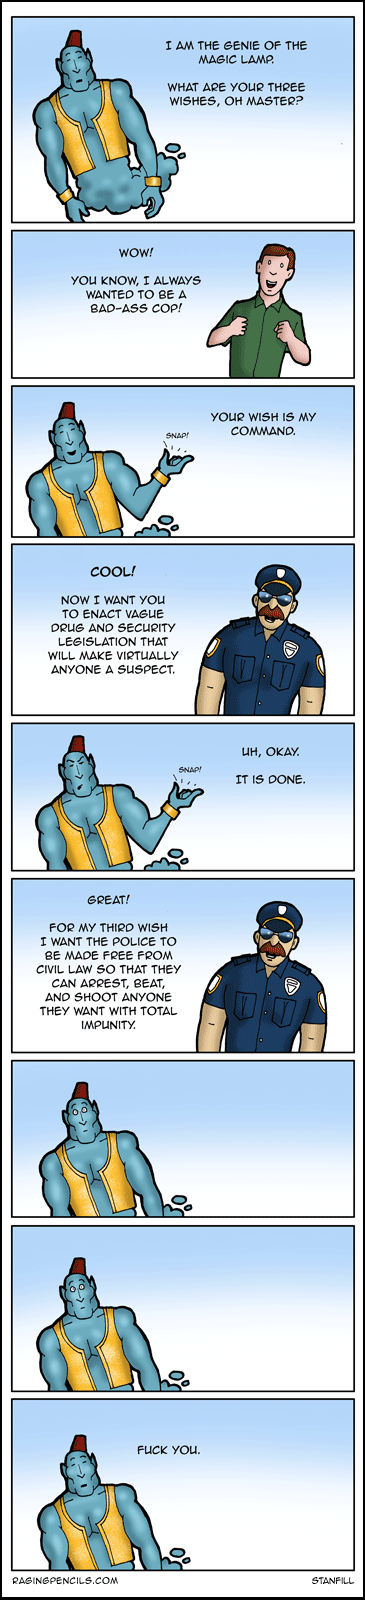 The police didn't get their abusive powers from some magic blue fucker.